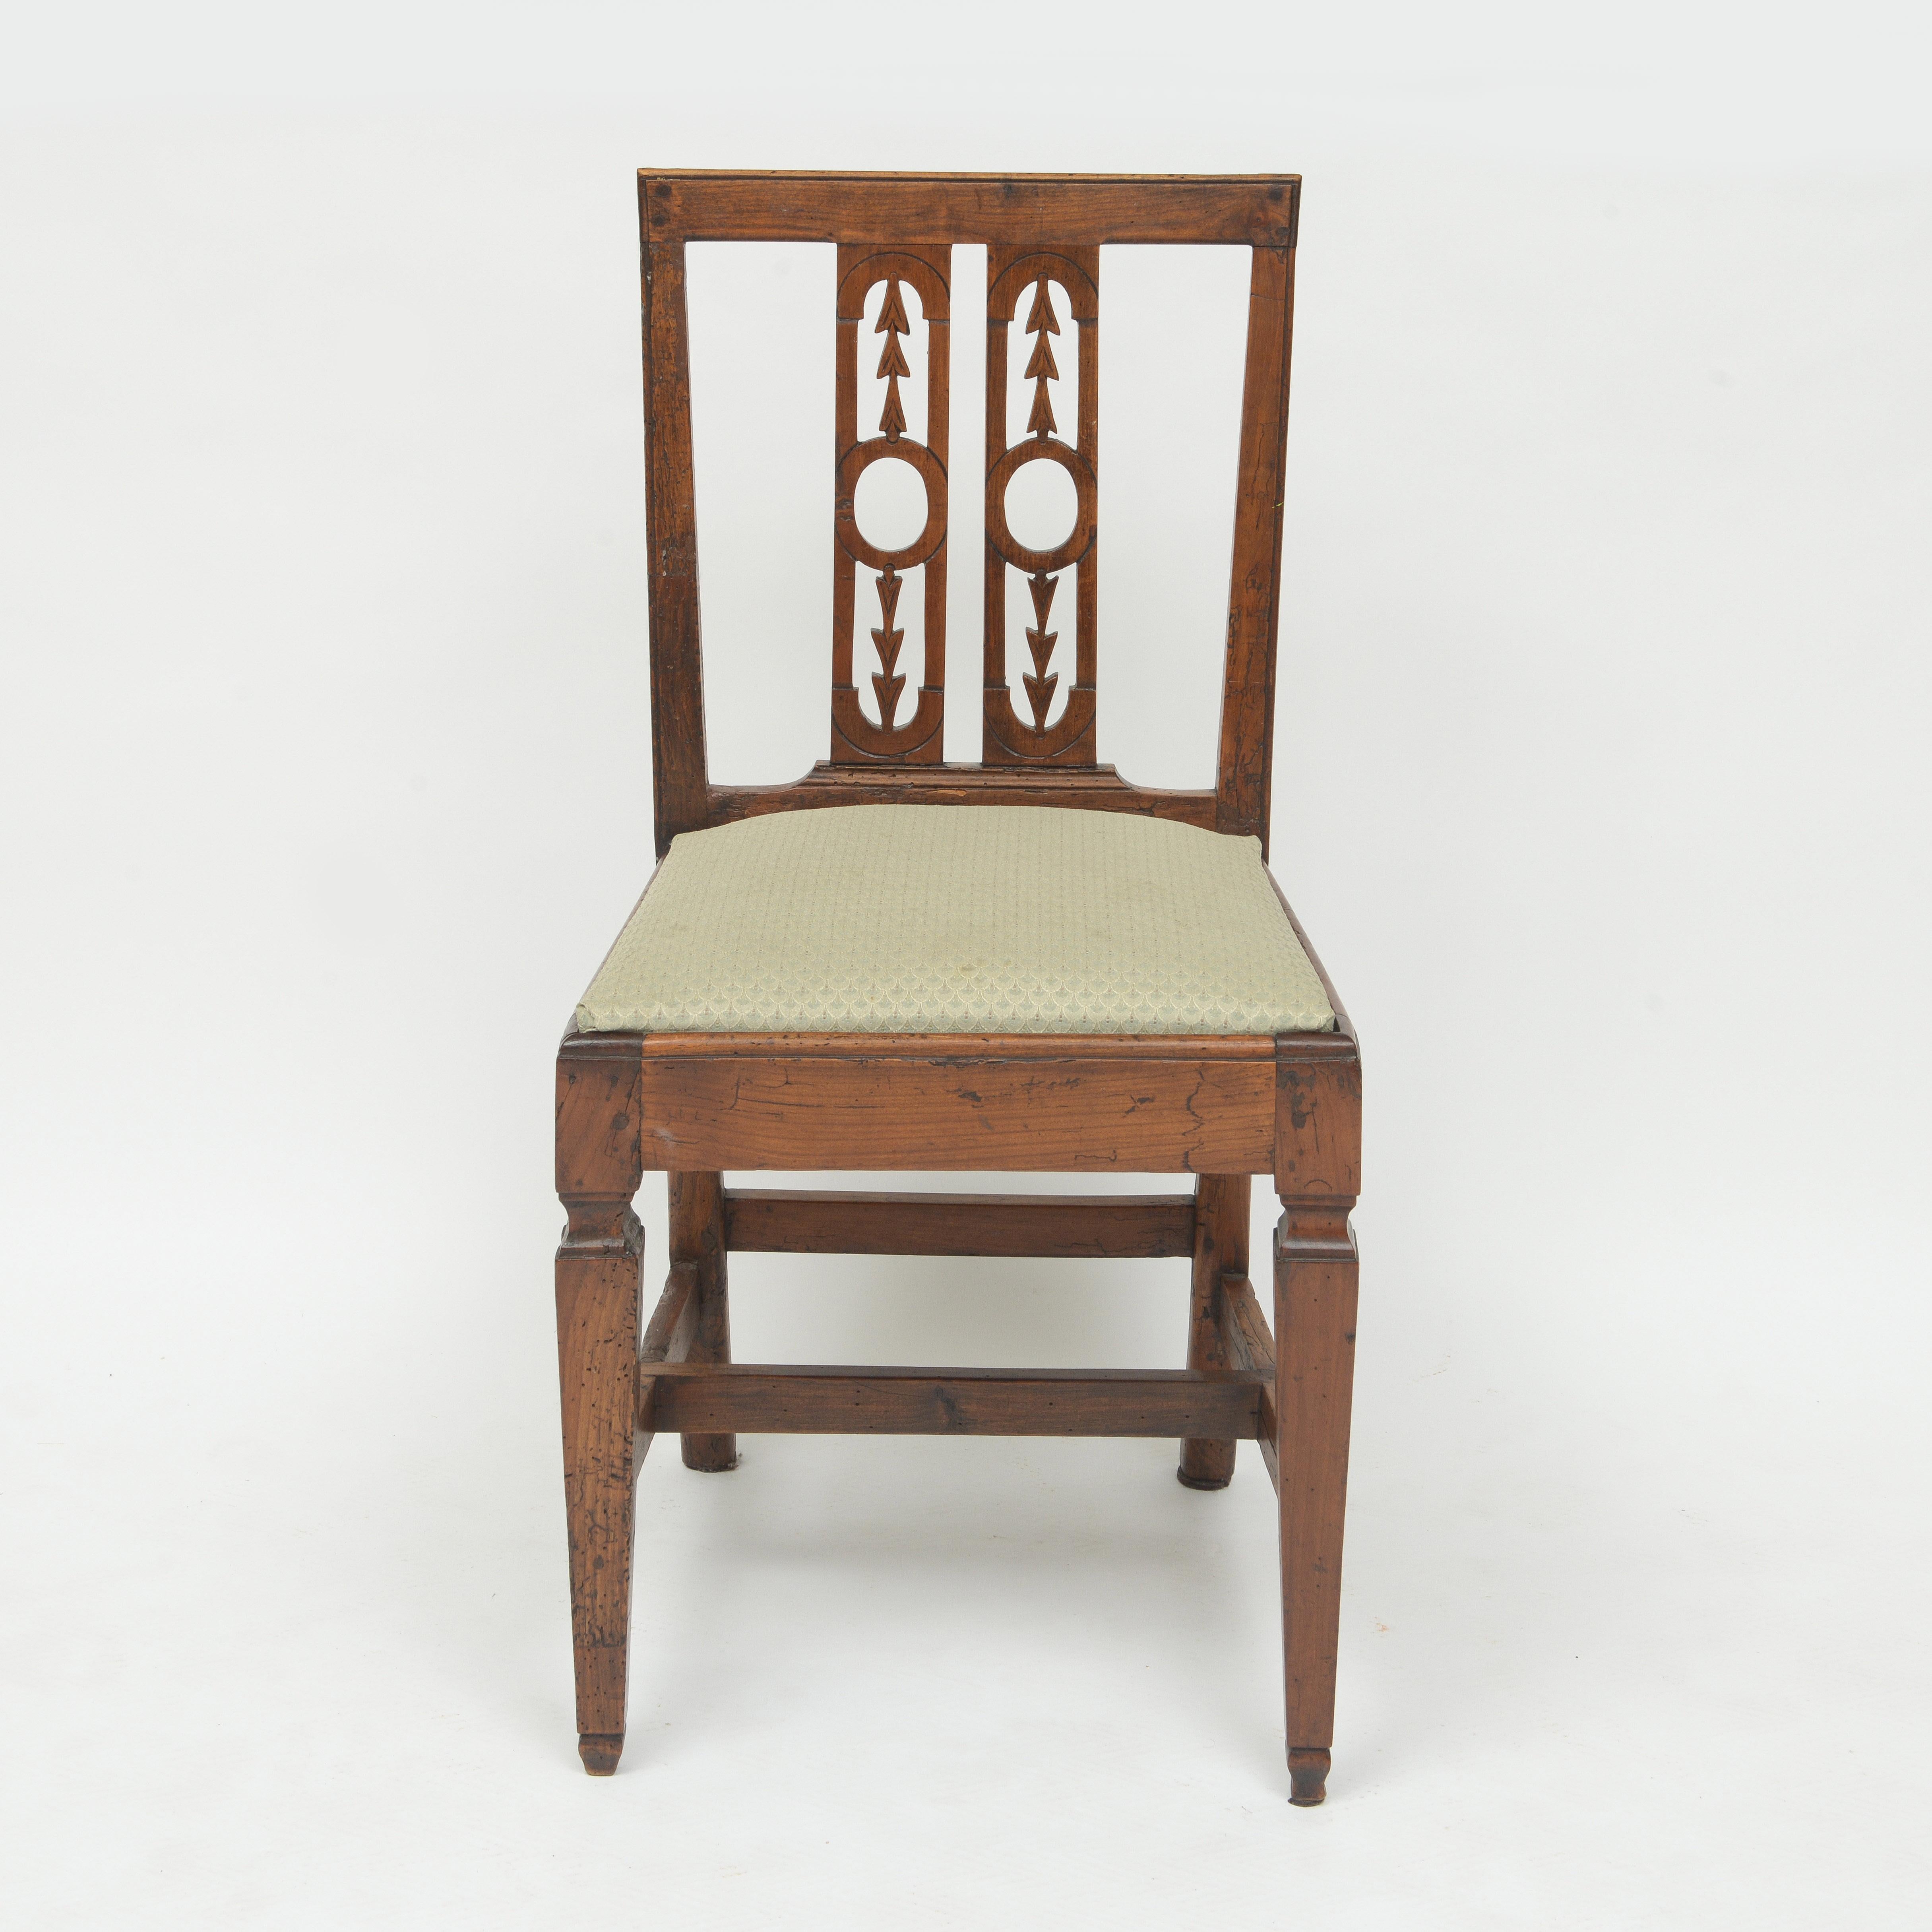 Set of six walnut side chairs with drop in seats
Decoratively carved backs with ovals and arrows
Finished on a spade foot.